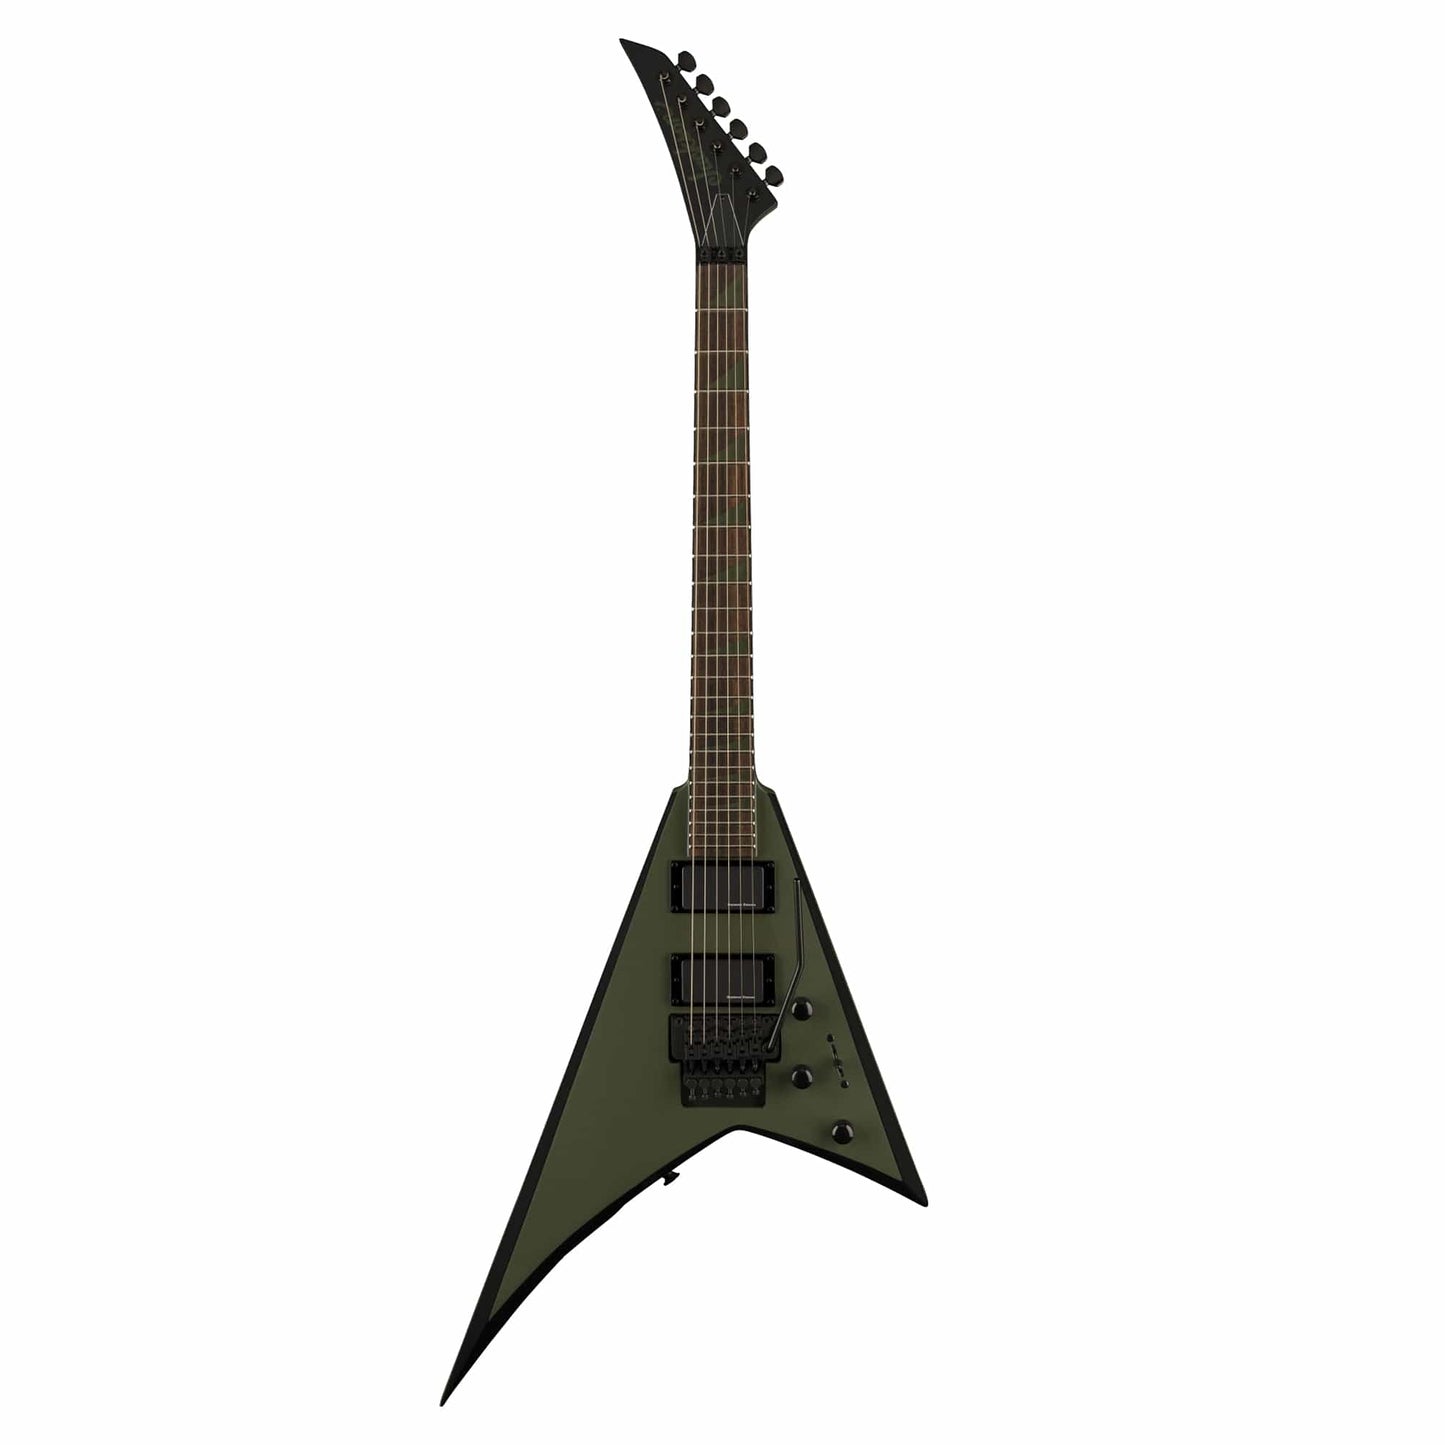 Jackson X Series Rhoads RRX24 Matte Army Drab with Black Bevels Electric Guitars / Solid Body